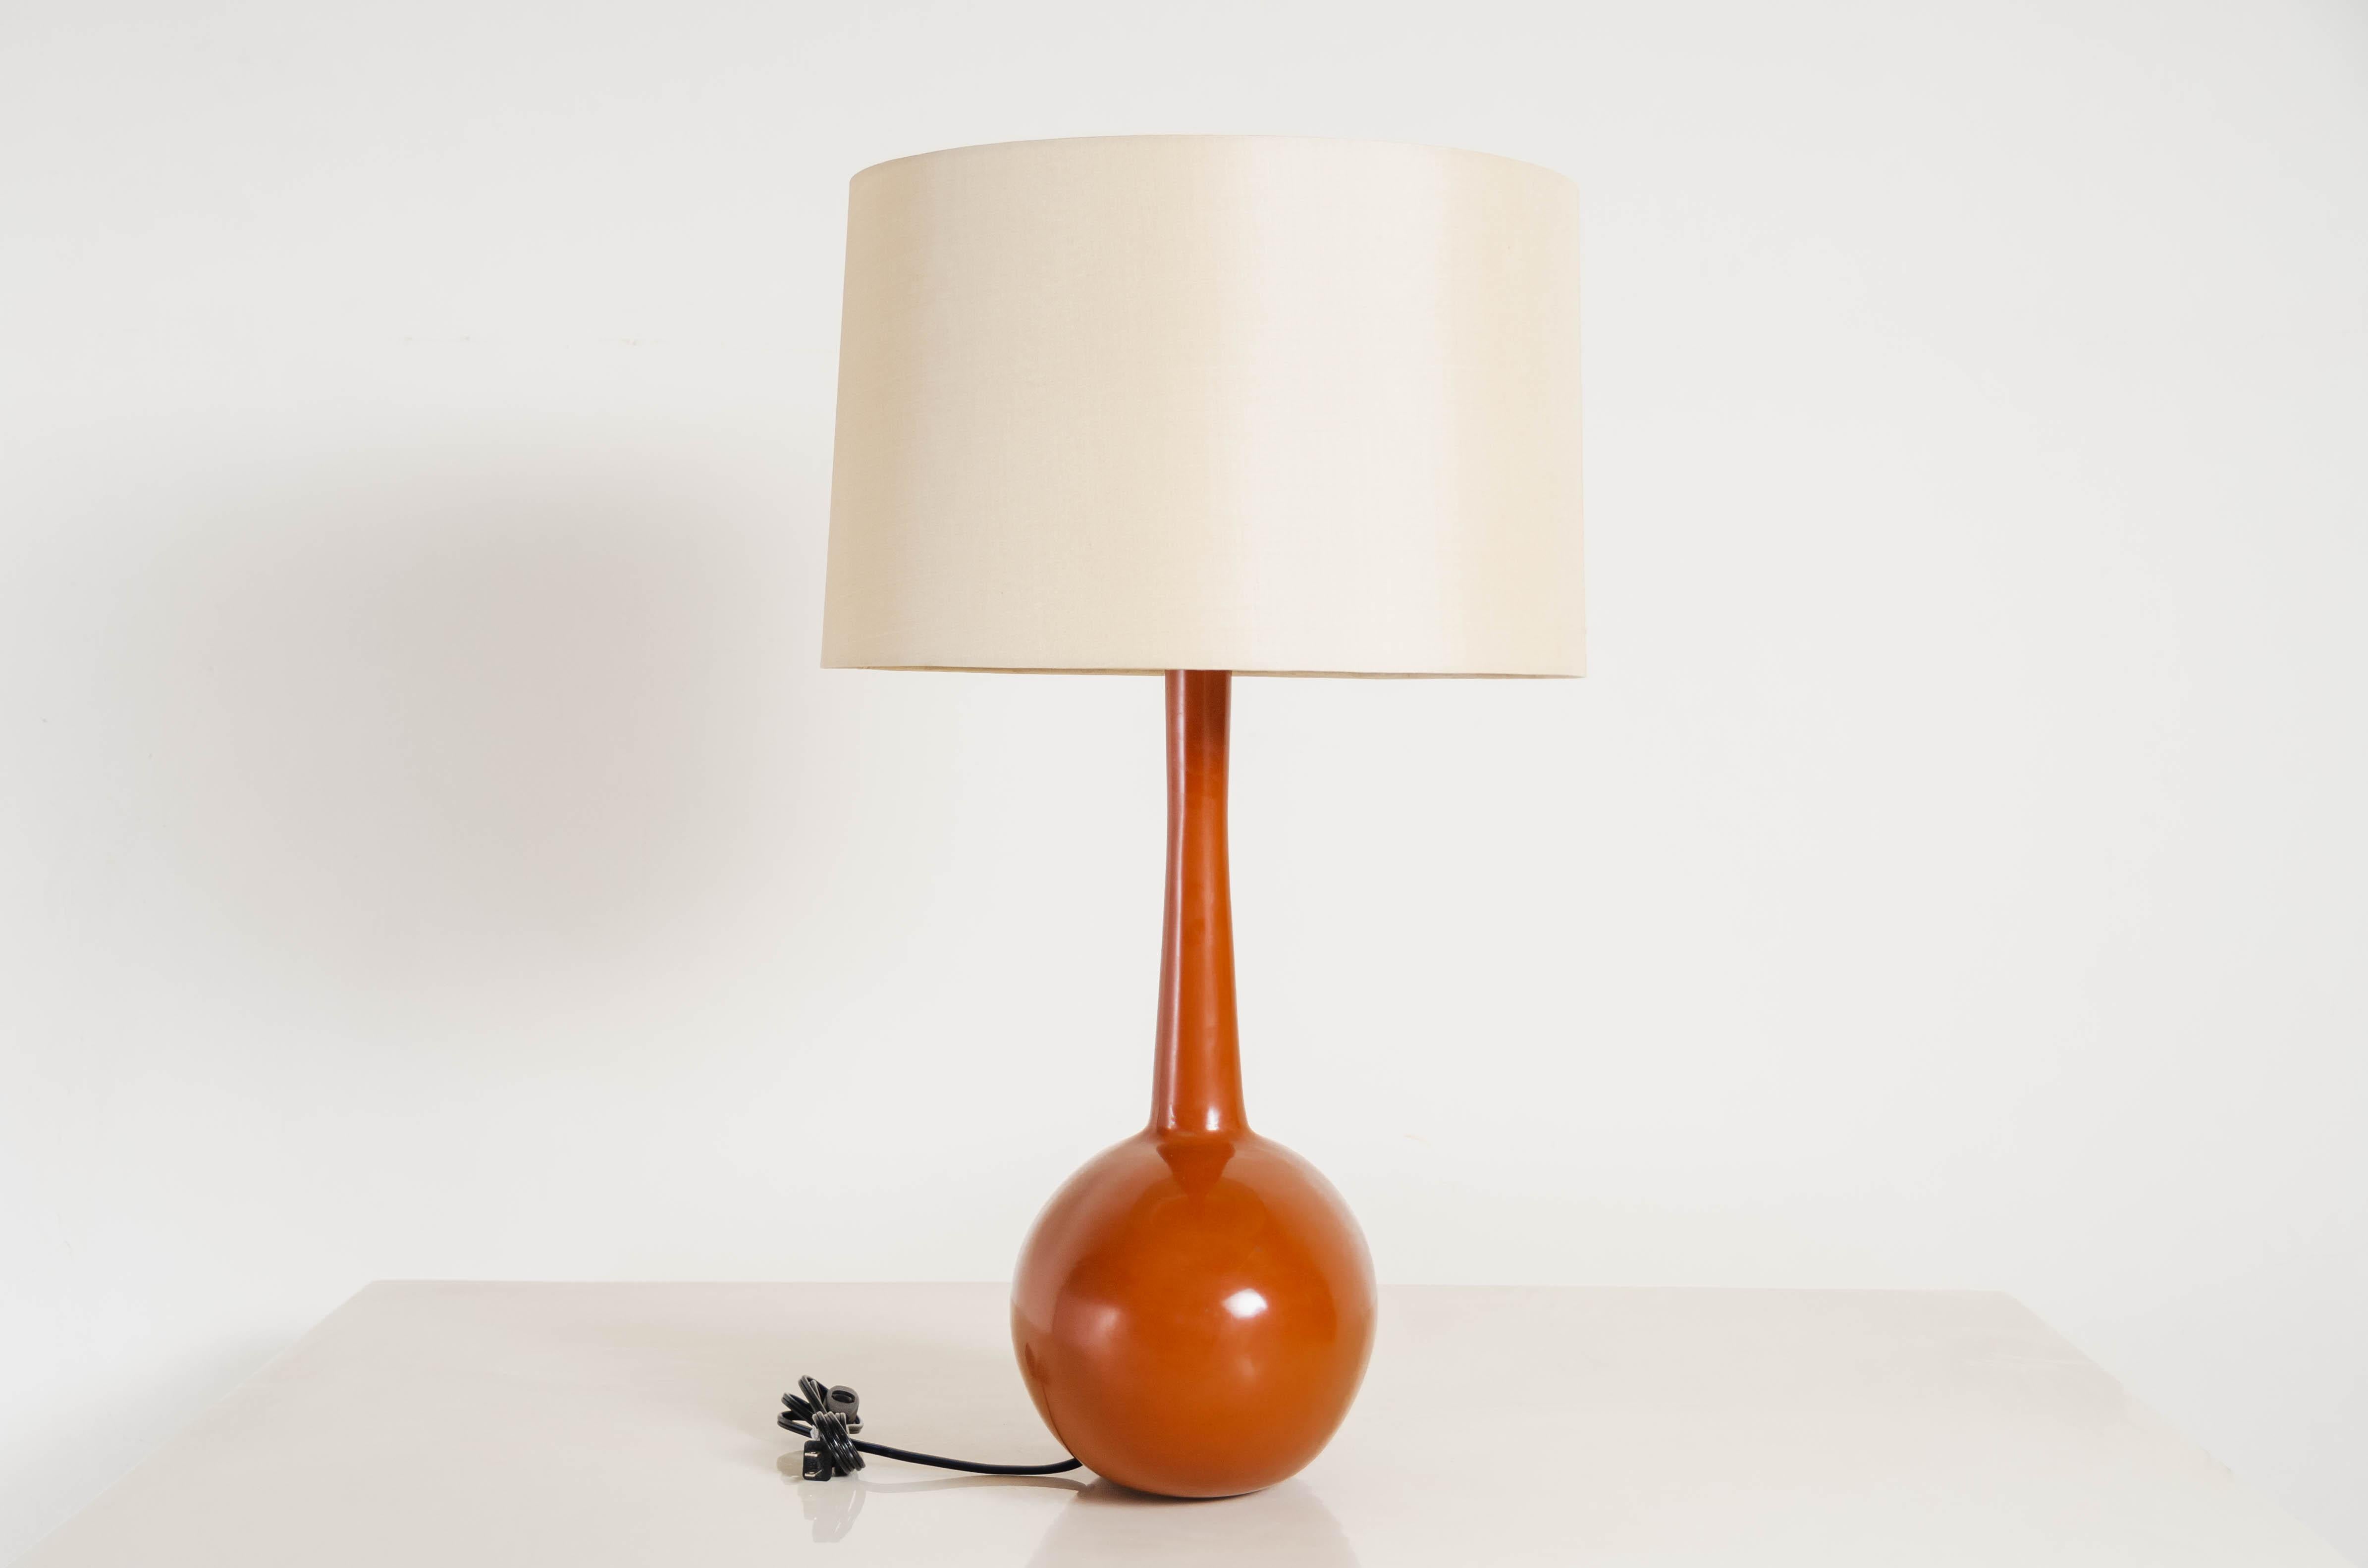 Repoussé Tall Cocoon Table Lamp, Mila Lacquer by Robert Kuo, Hand Repousse, Limited For Sale